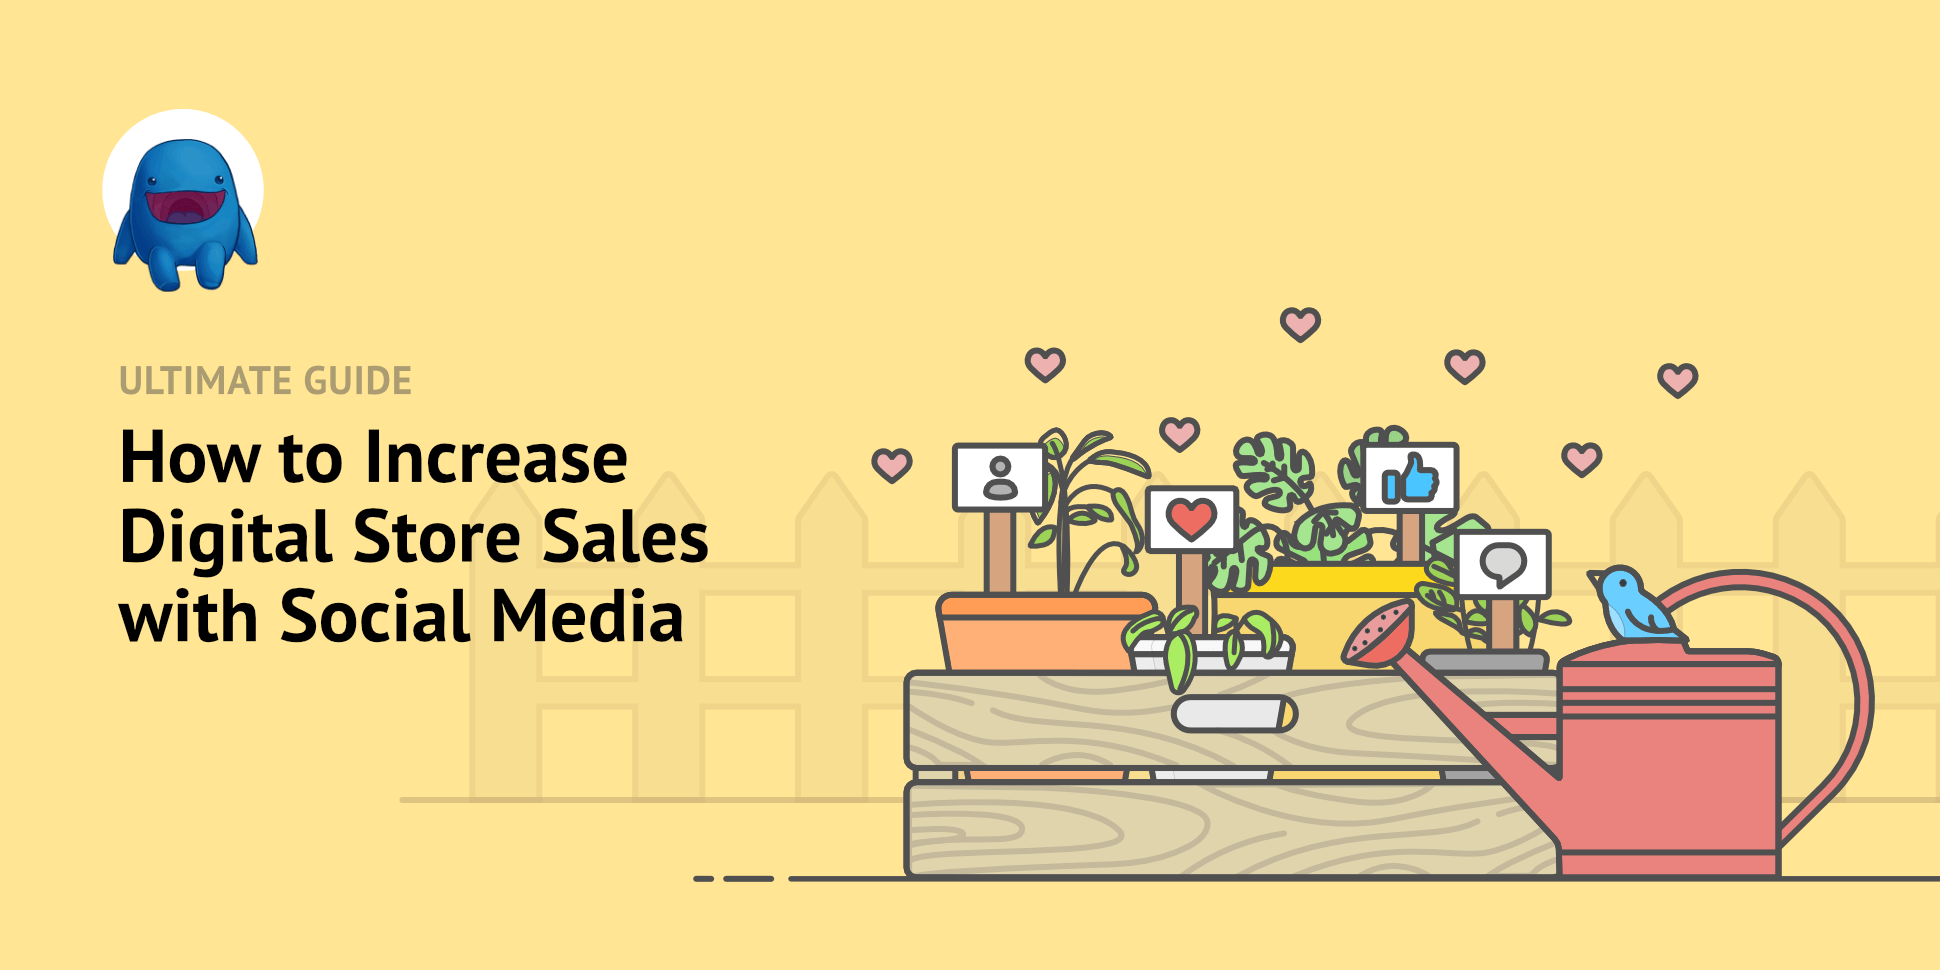 Illustration: social media icons with hearts